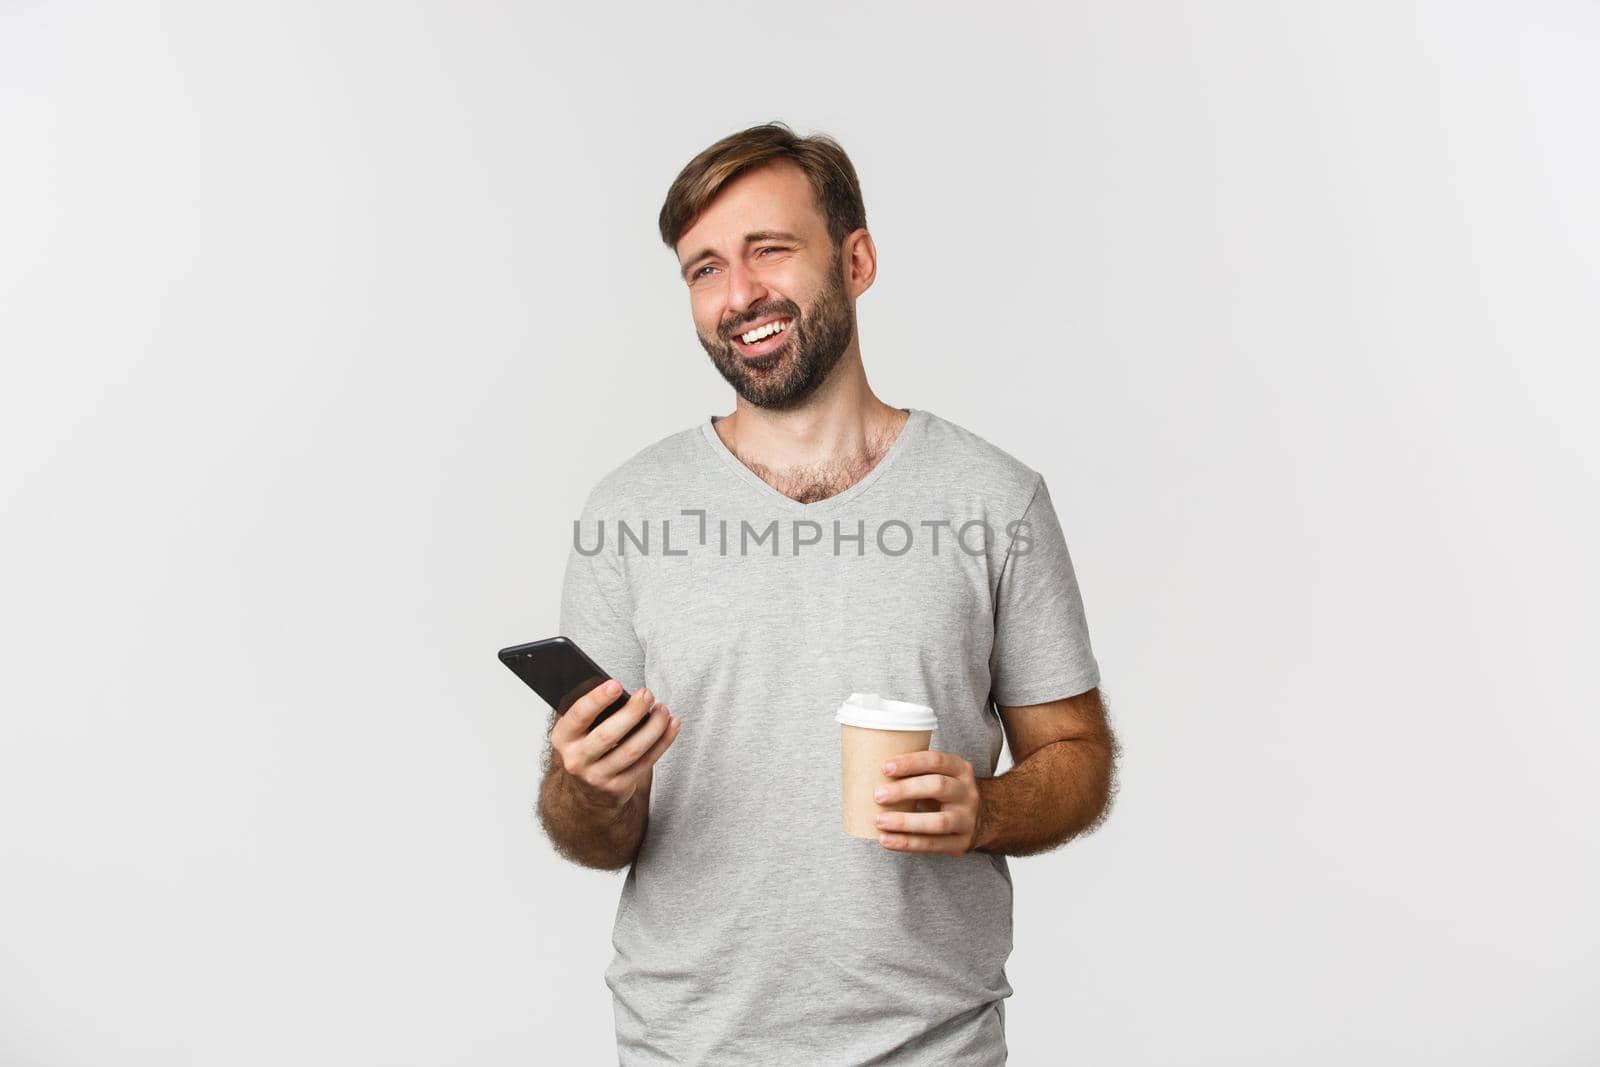 Image of modern caucasian man with beard, drinking coffee and casually using mobile phone, laughing as if talking to someone, standing over white background.